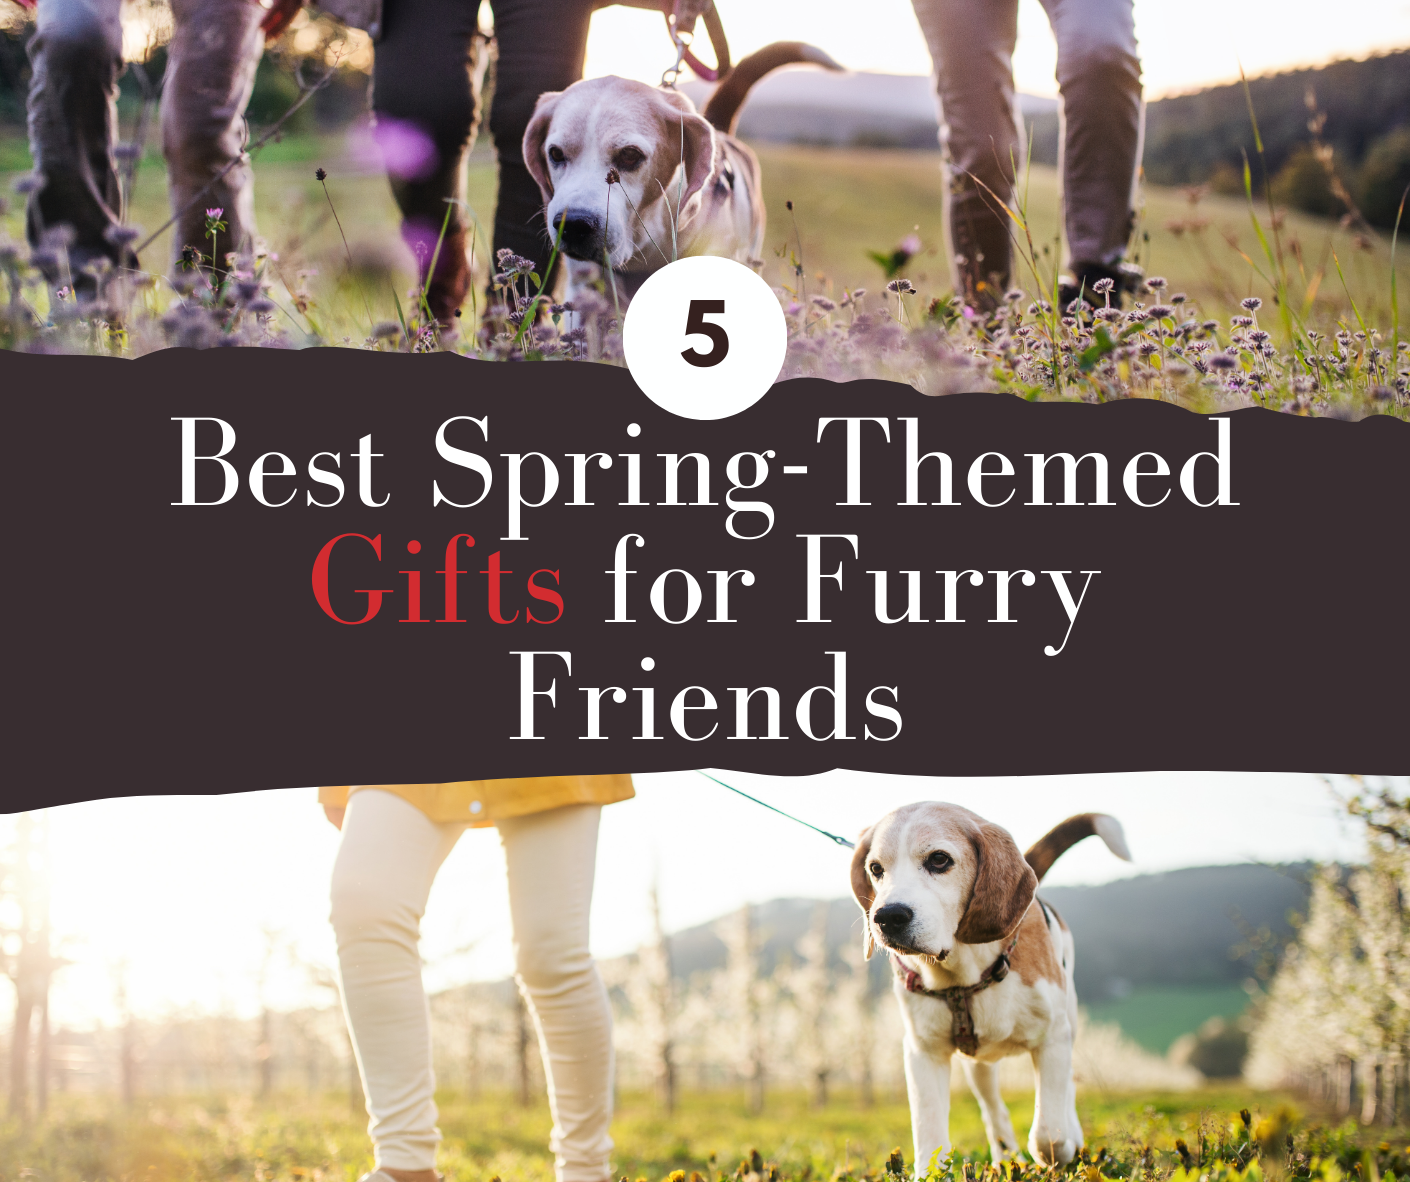 5 Spring-Themed Gifts for Furry Friends : A Guide to Pampering Your Pet